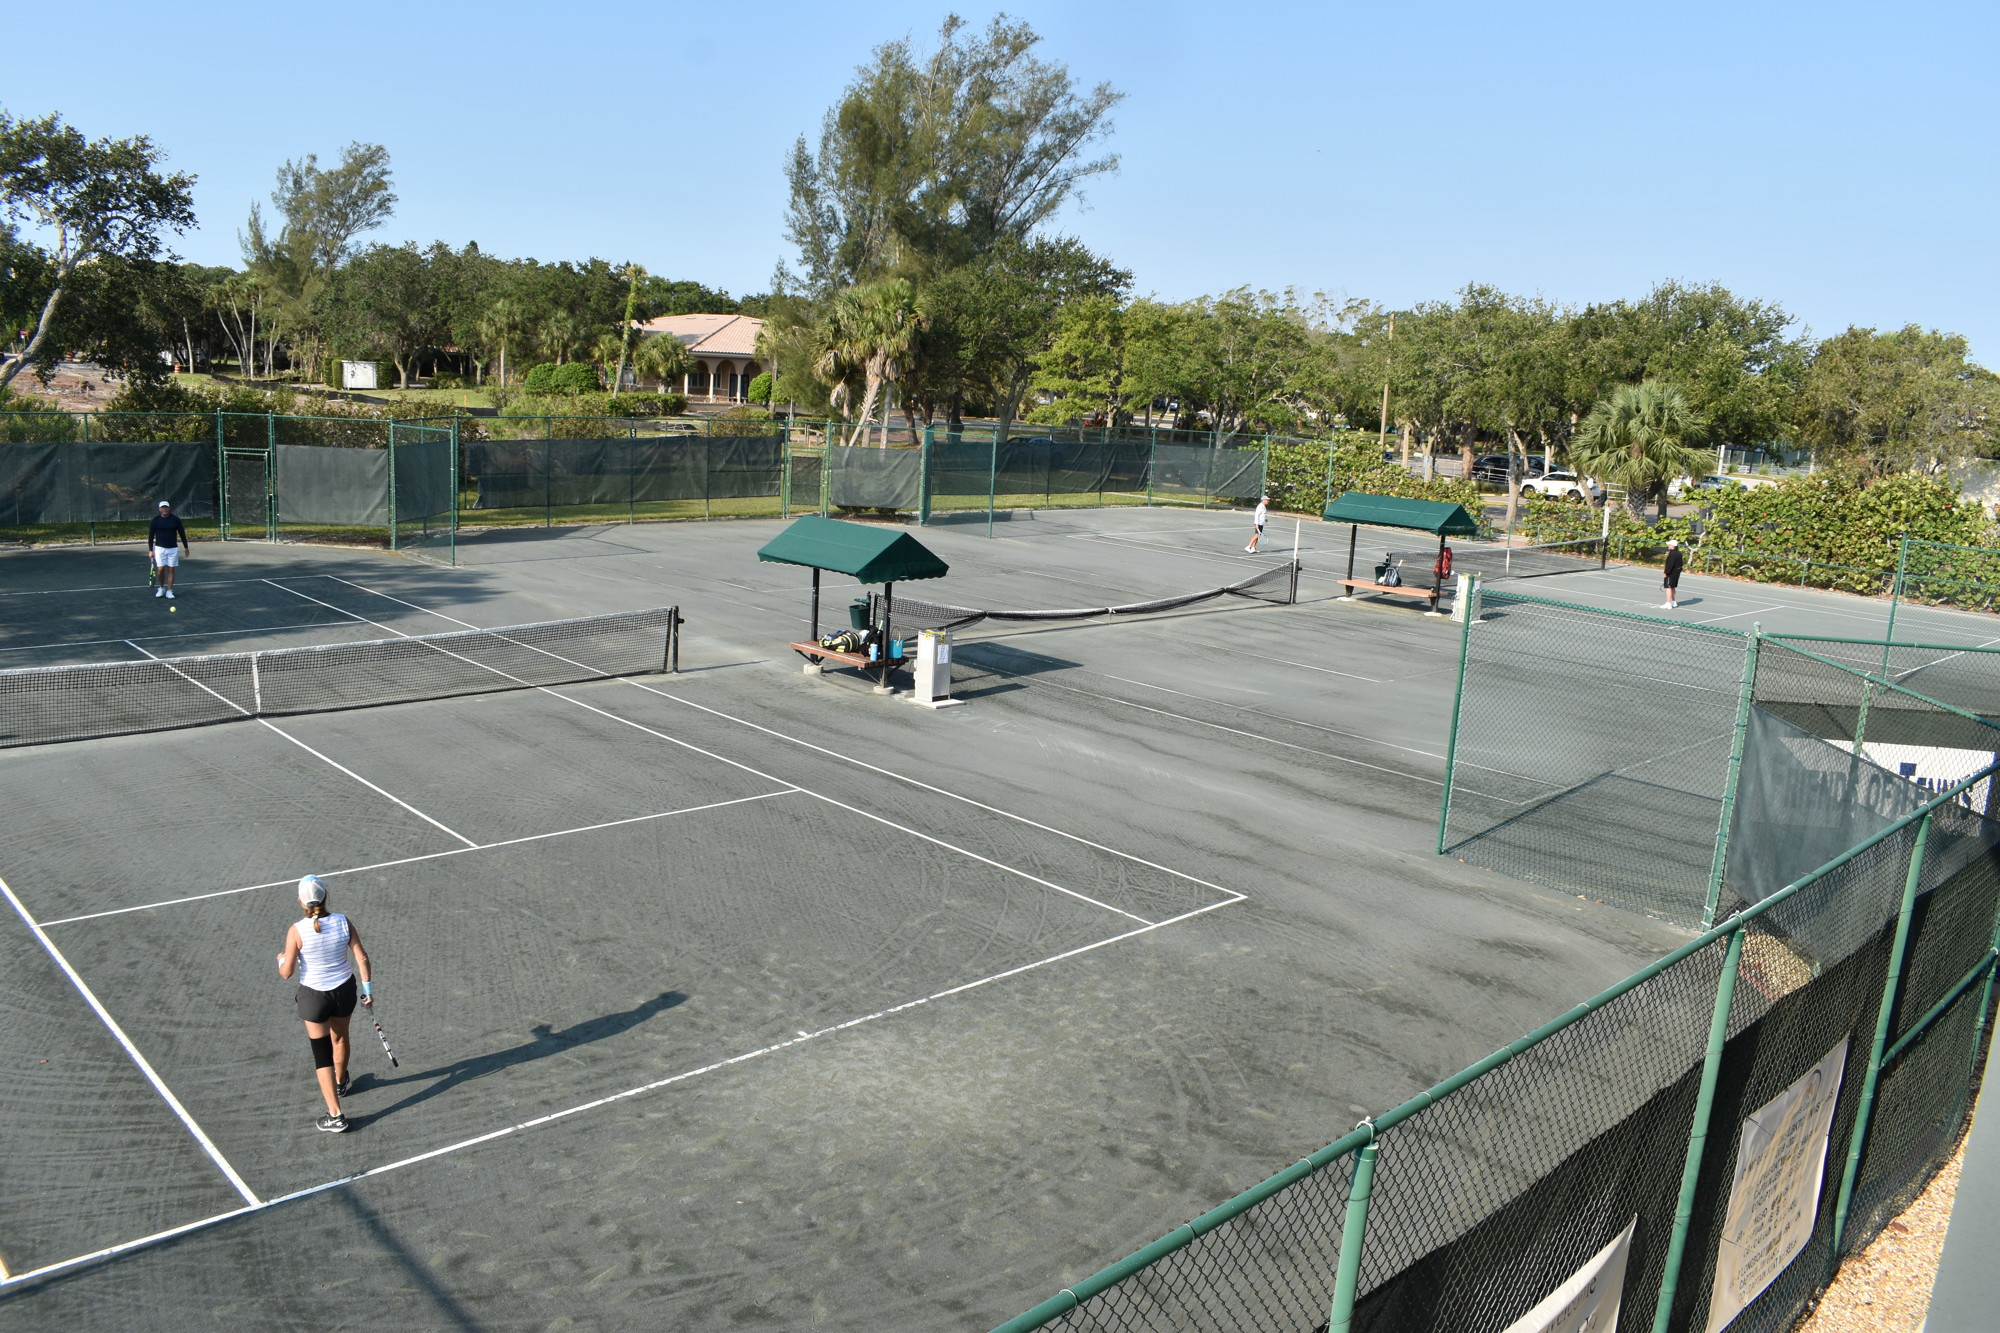 Singles play resumed at the Longboat Key Tennis Center on May 8.